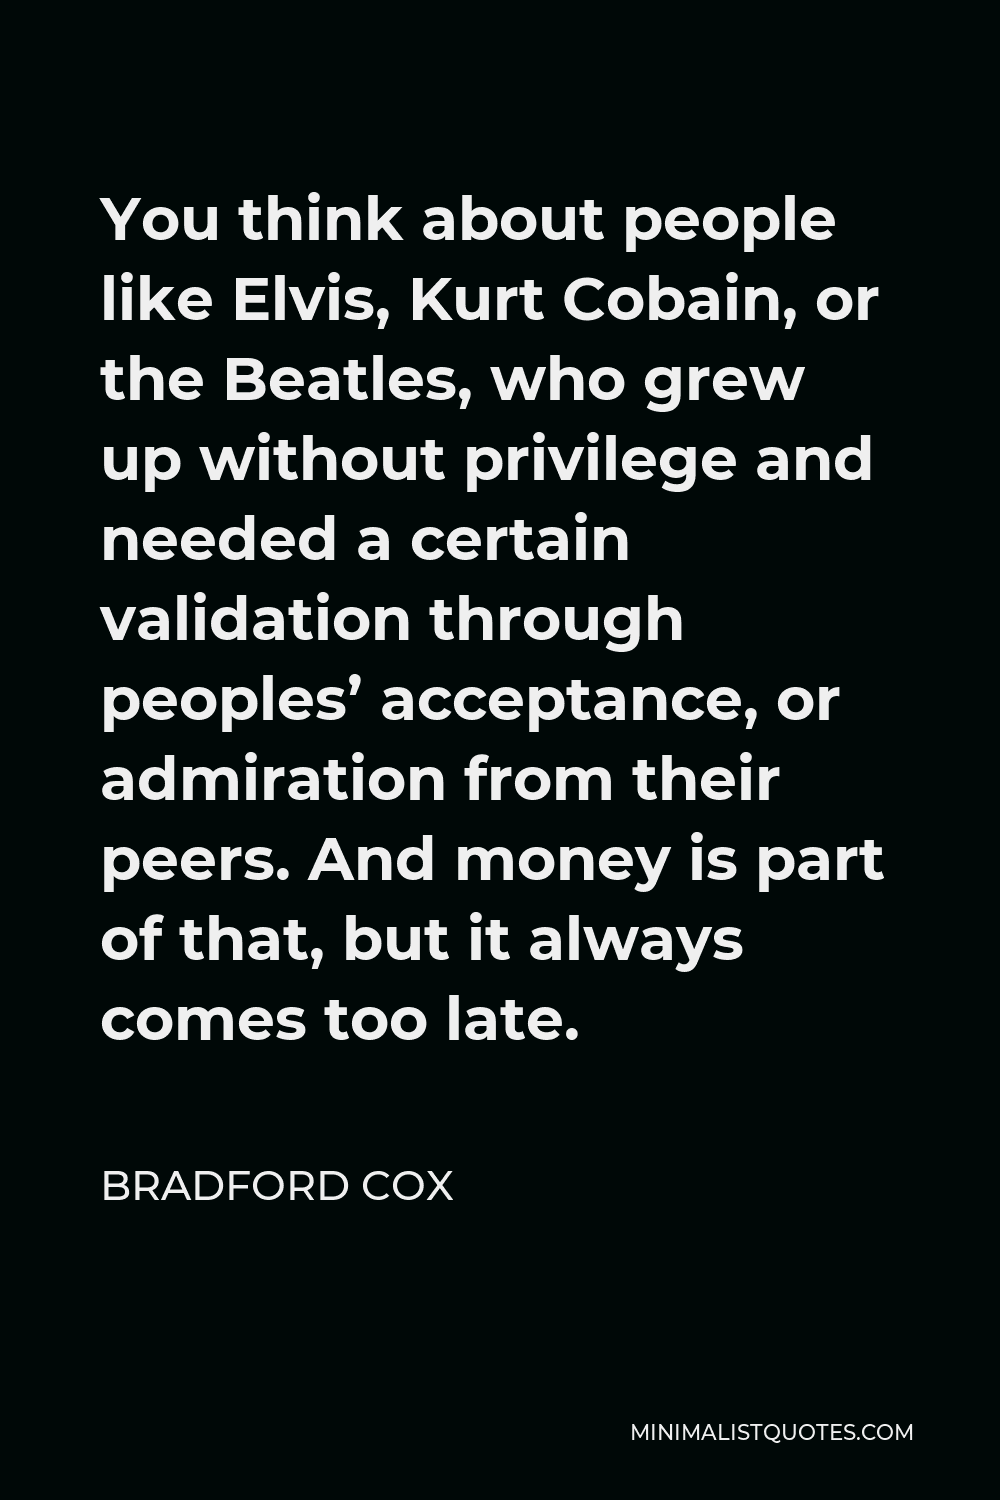 Bradford Cox Quote - You think about people like Elvis, Kurt Cobain, or the Beatles, who grew up without privilege and needed a certain validation through peoples’ acceptance, or admiration from their peers. And money is part of that, but it always comes too late.